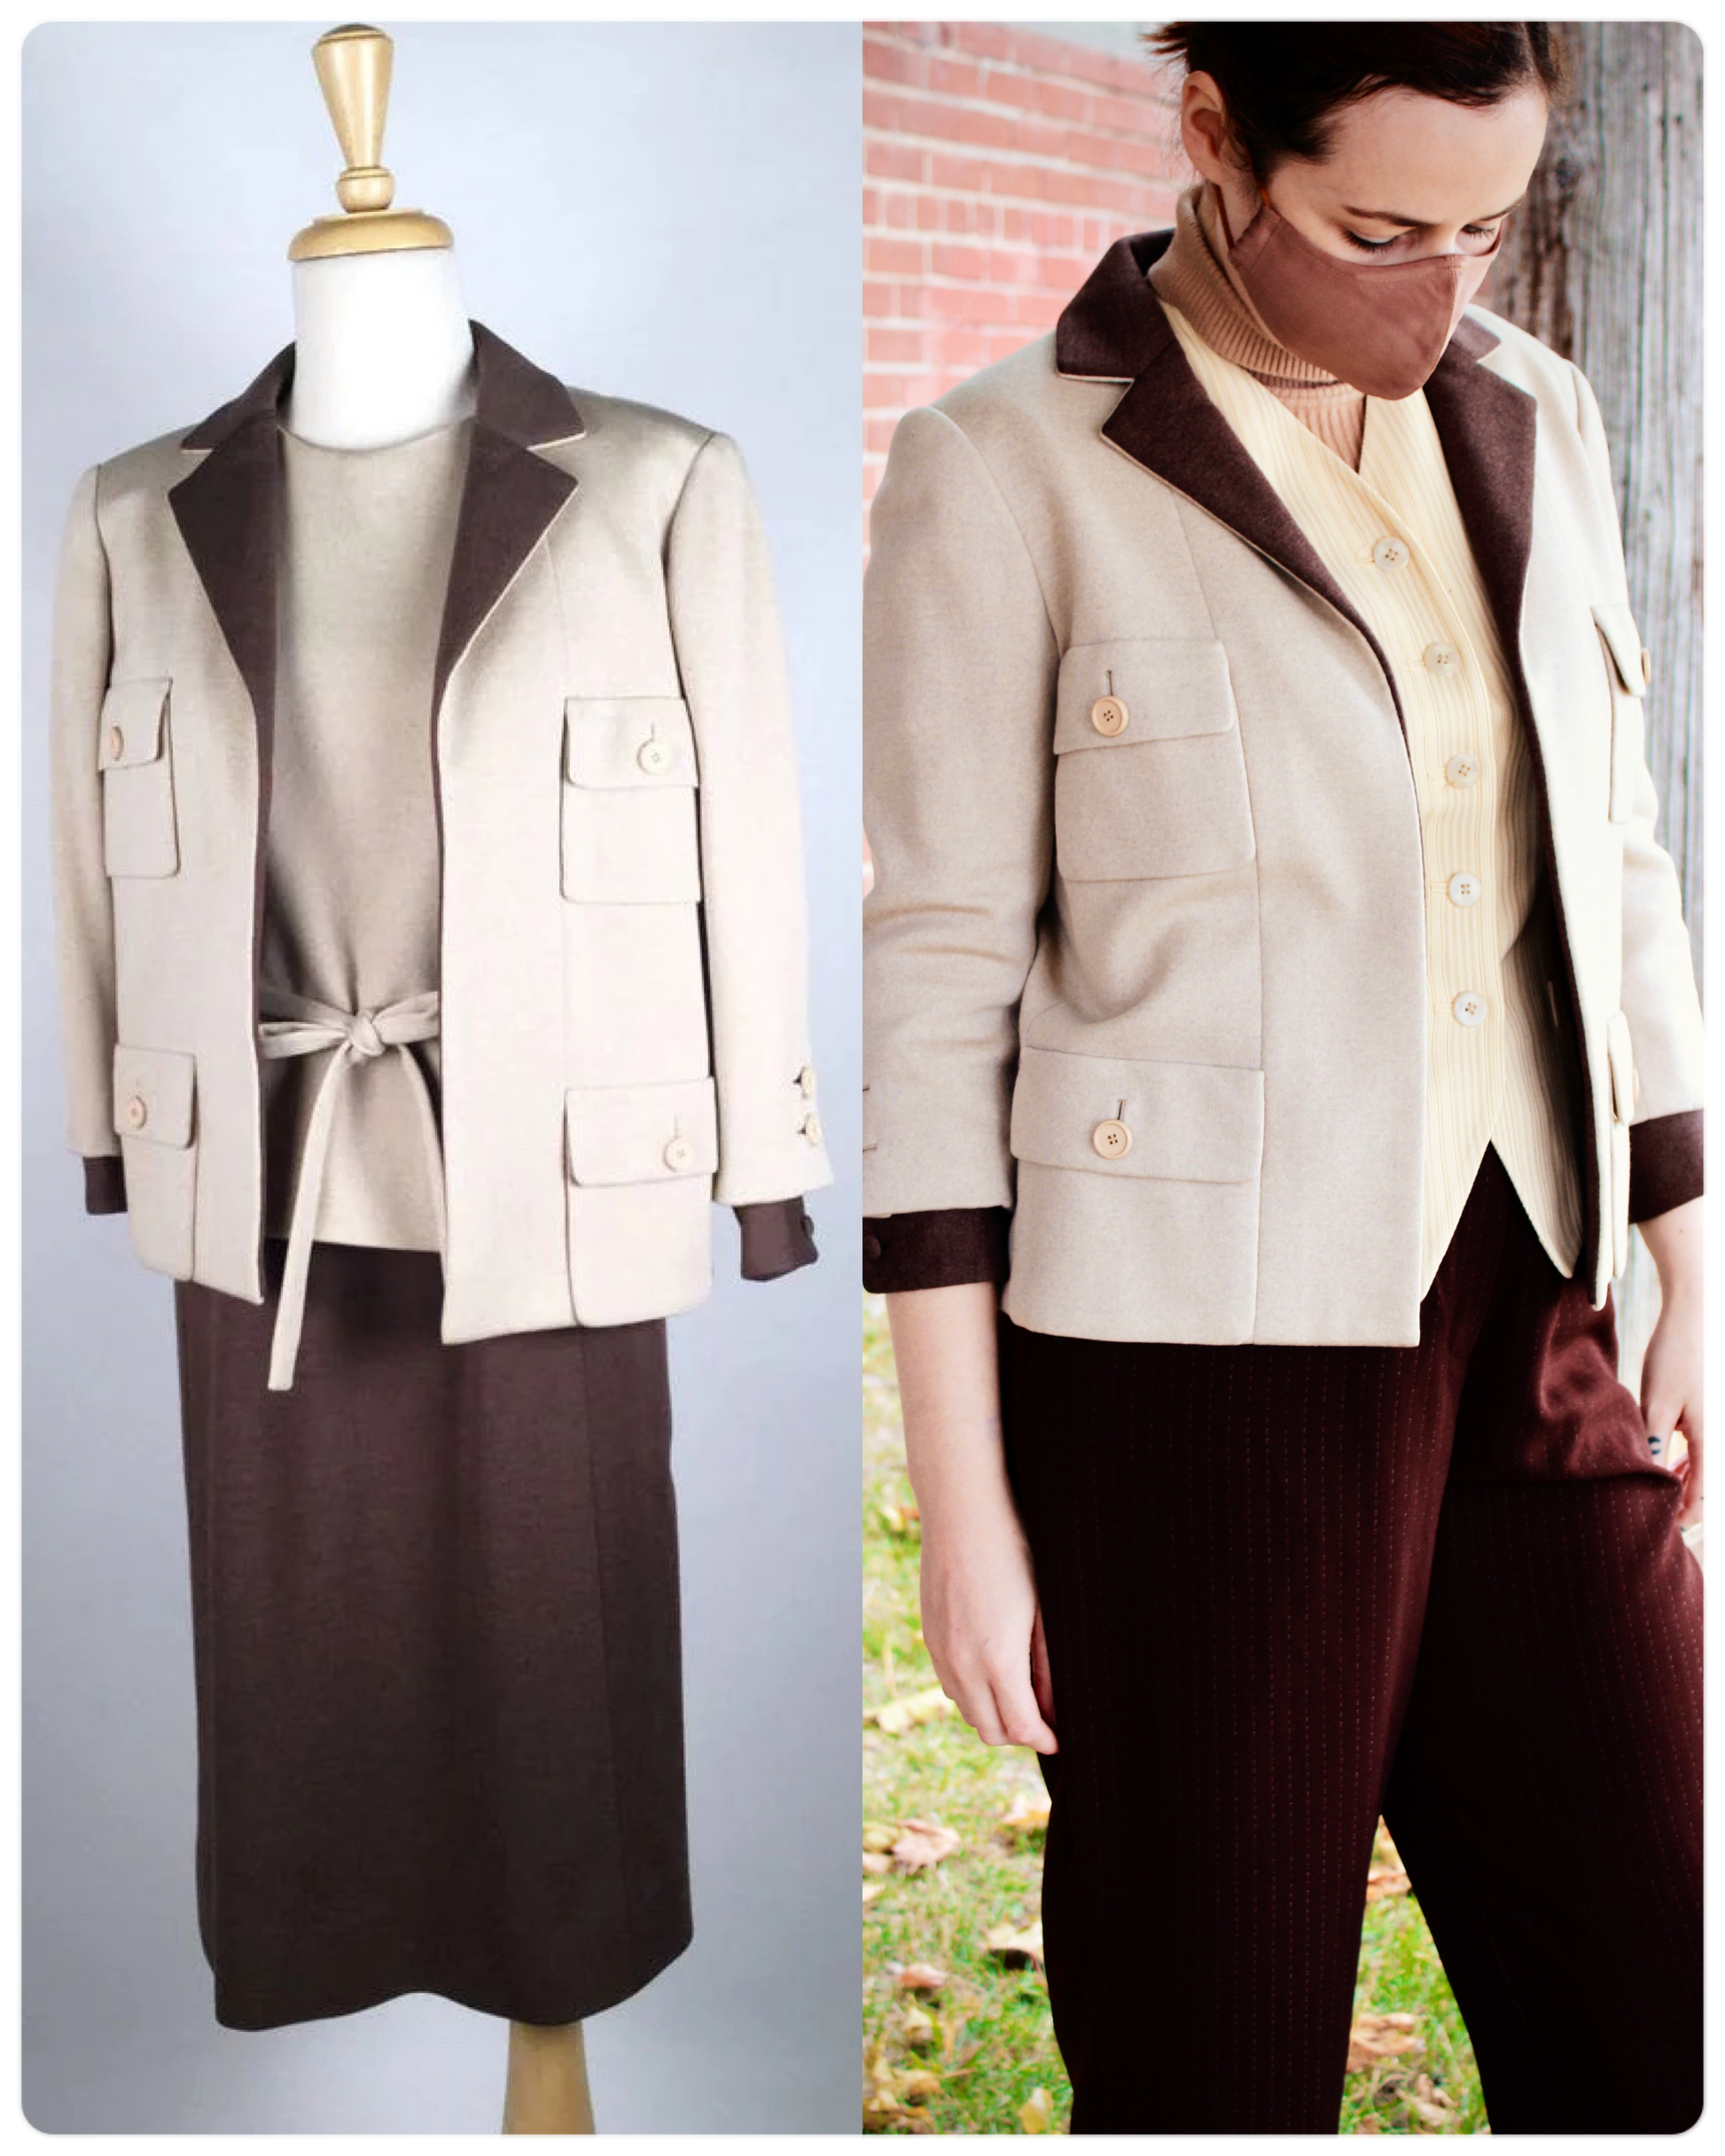 1960s Norman Norell Mod 3 Piece Suit, Wool Jacket, Top & Skirt, W24"